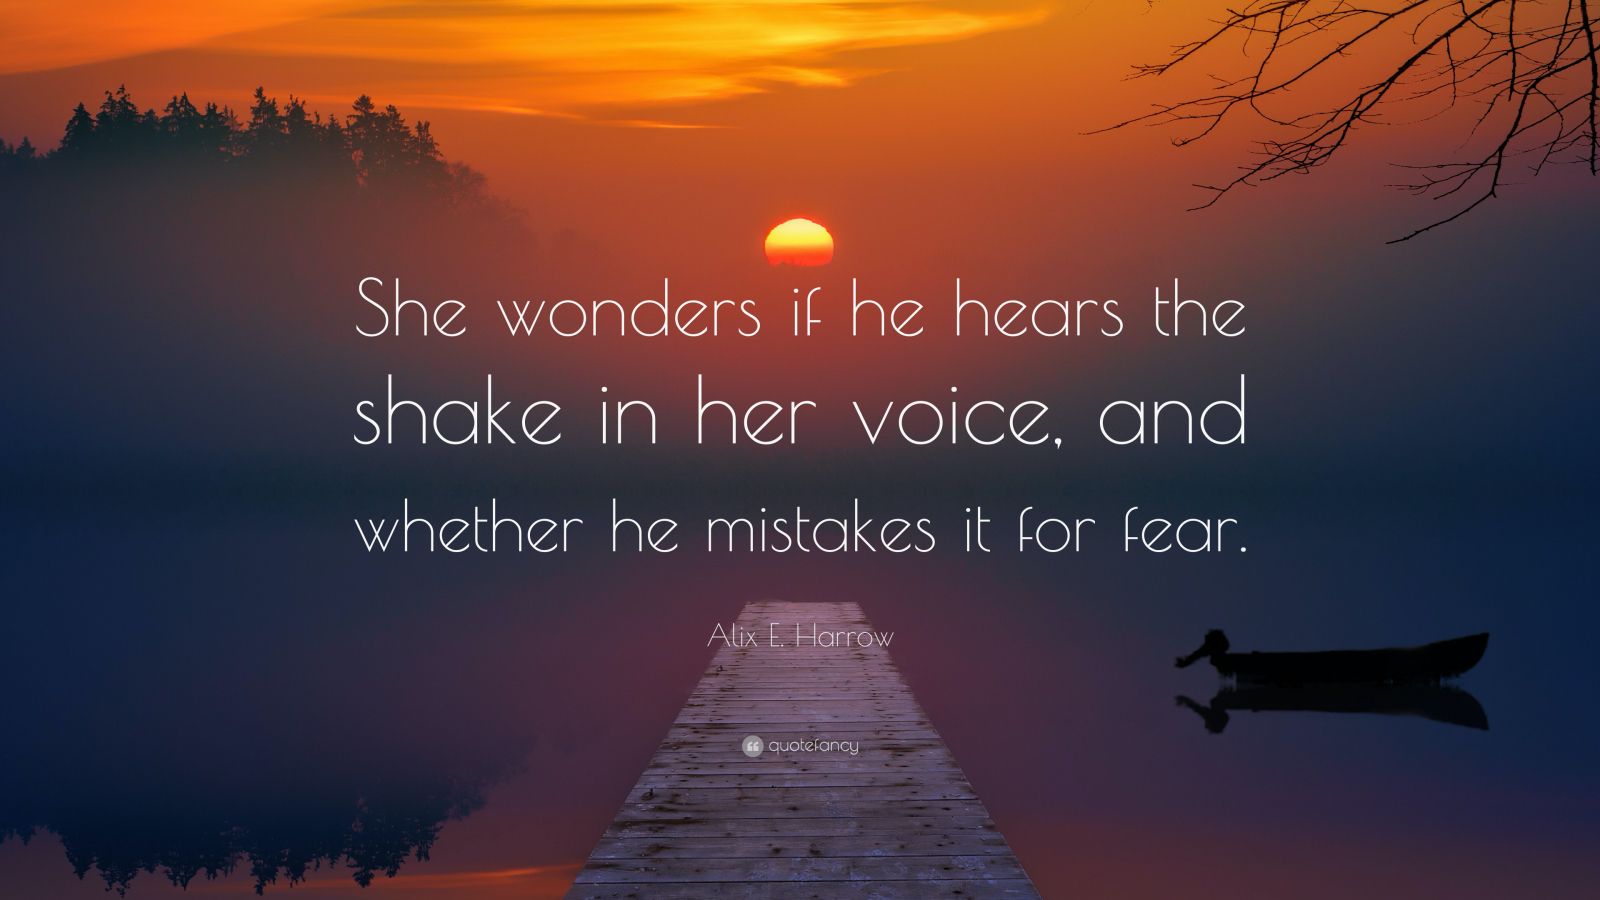 Alix E. Harrow Quote: “She wonders if he hears the shake in her voice ...